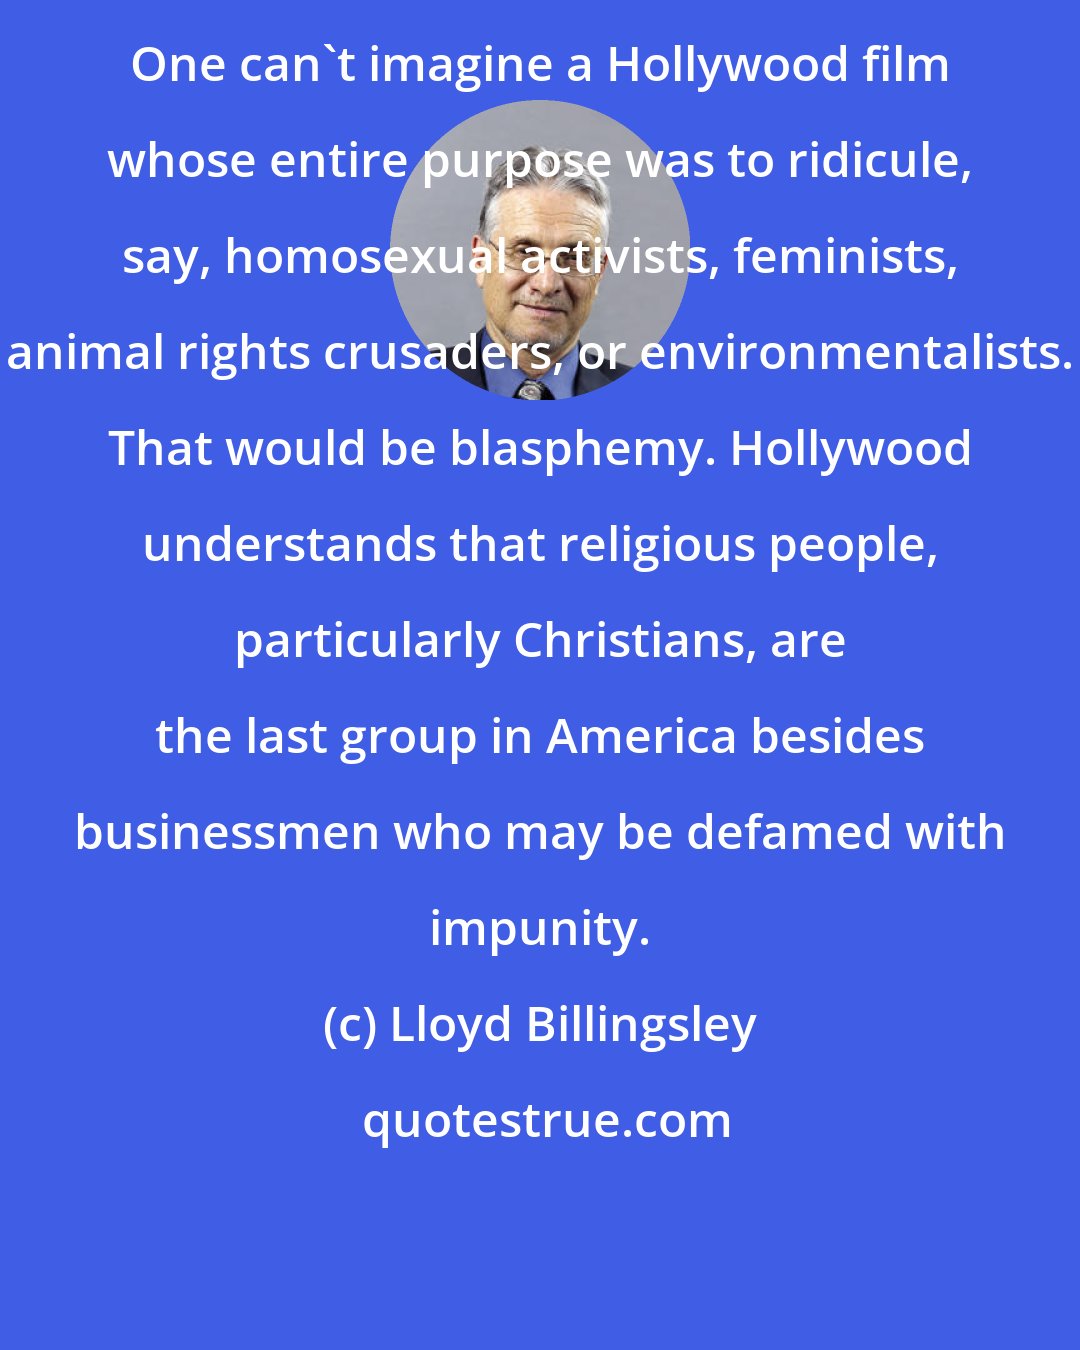 Lloyd Billingsley: One can't imagine a Hollywood film whose entire purpose was to ridicule, say, homosexual activists, feminists, animal rights crusaders, or environmentalists. That would be blasphemy. Hollywood understands that religious people, particularly Christians, are the last group in America besides businessmen who may be defamed with impunity.